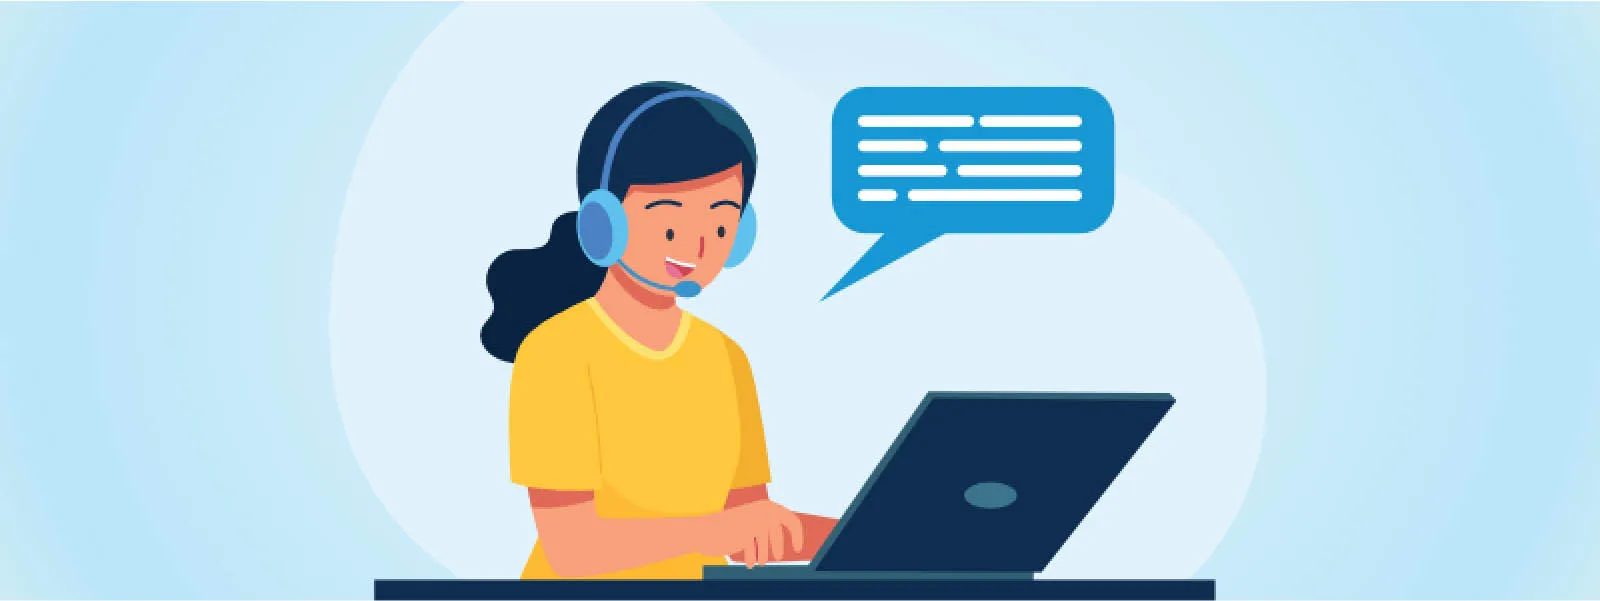 Customer service skills for live chat agents